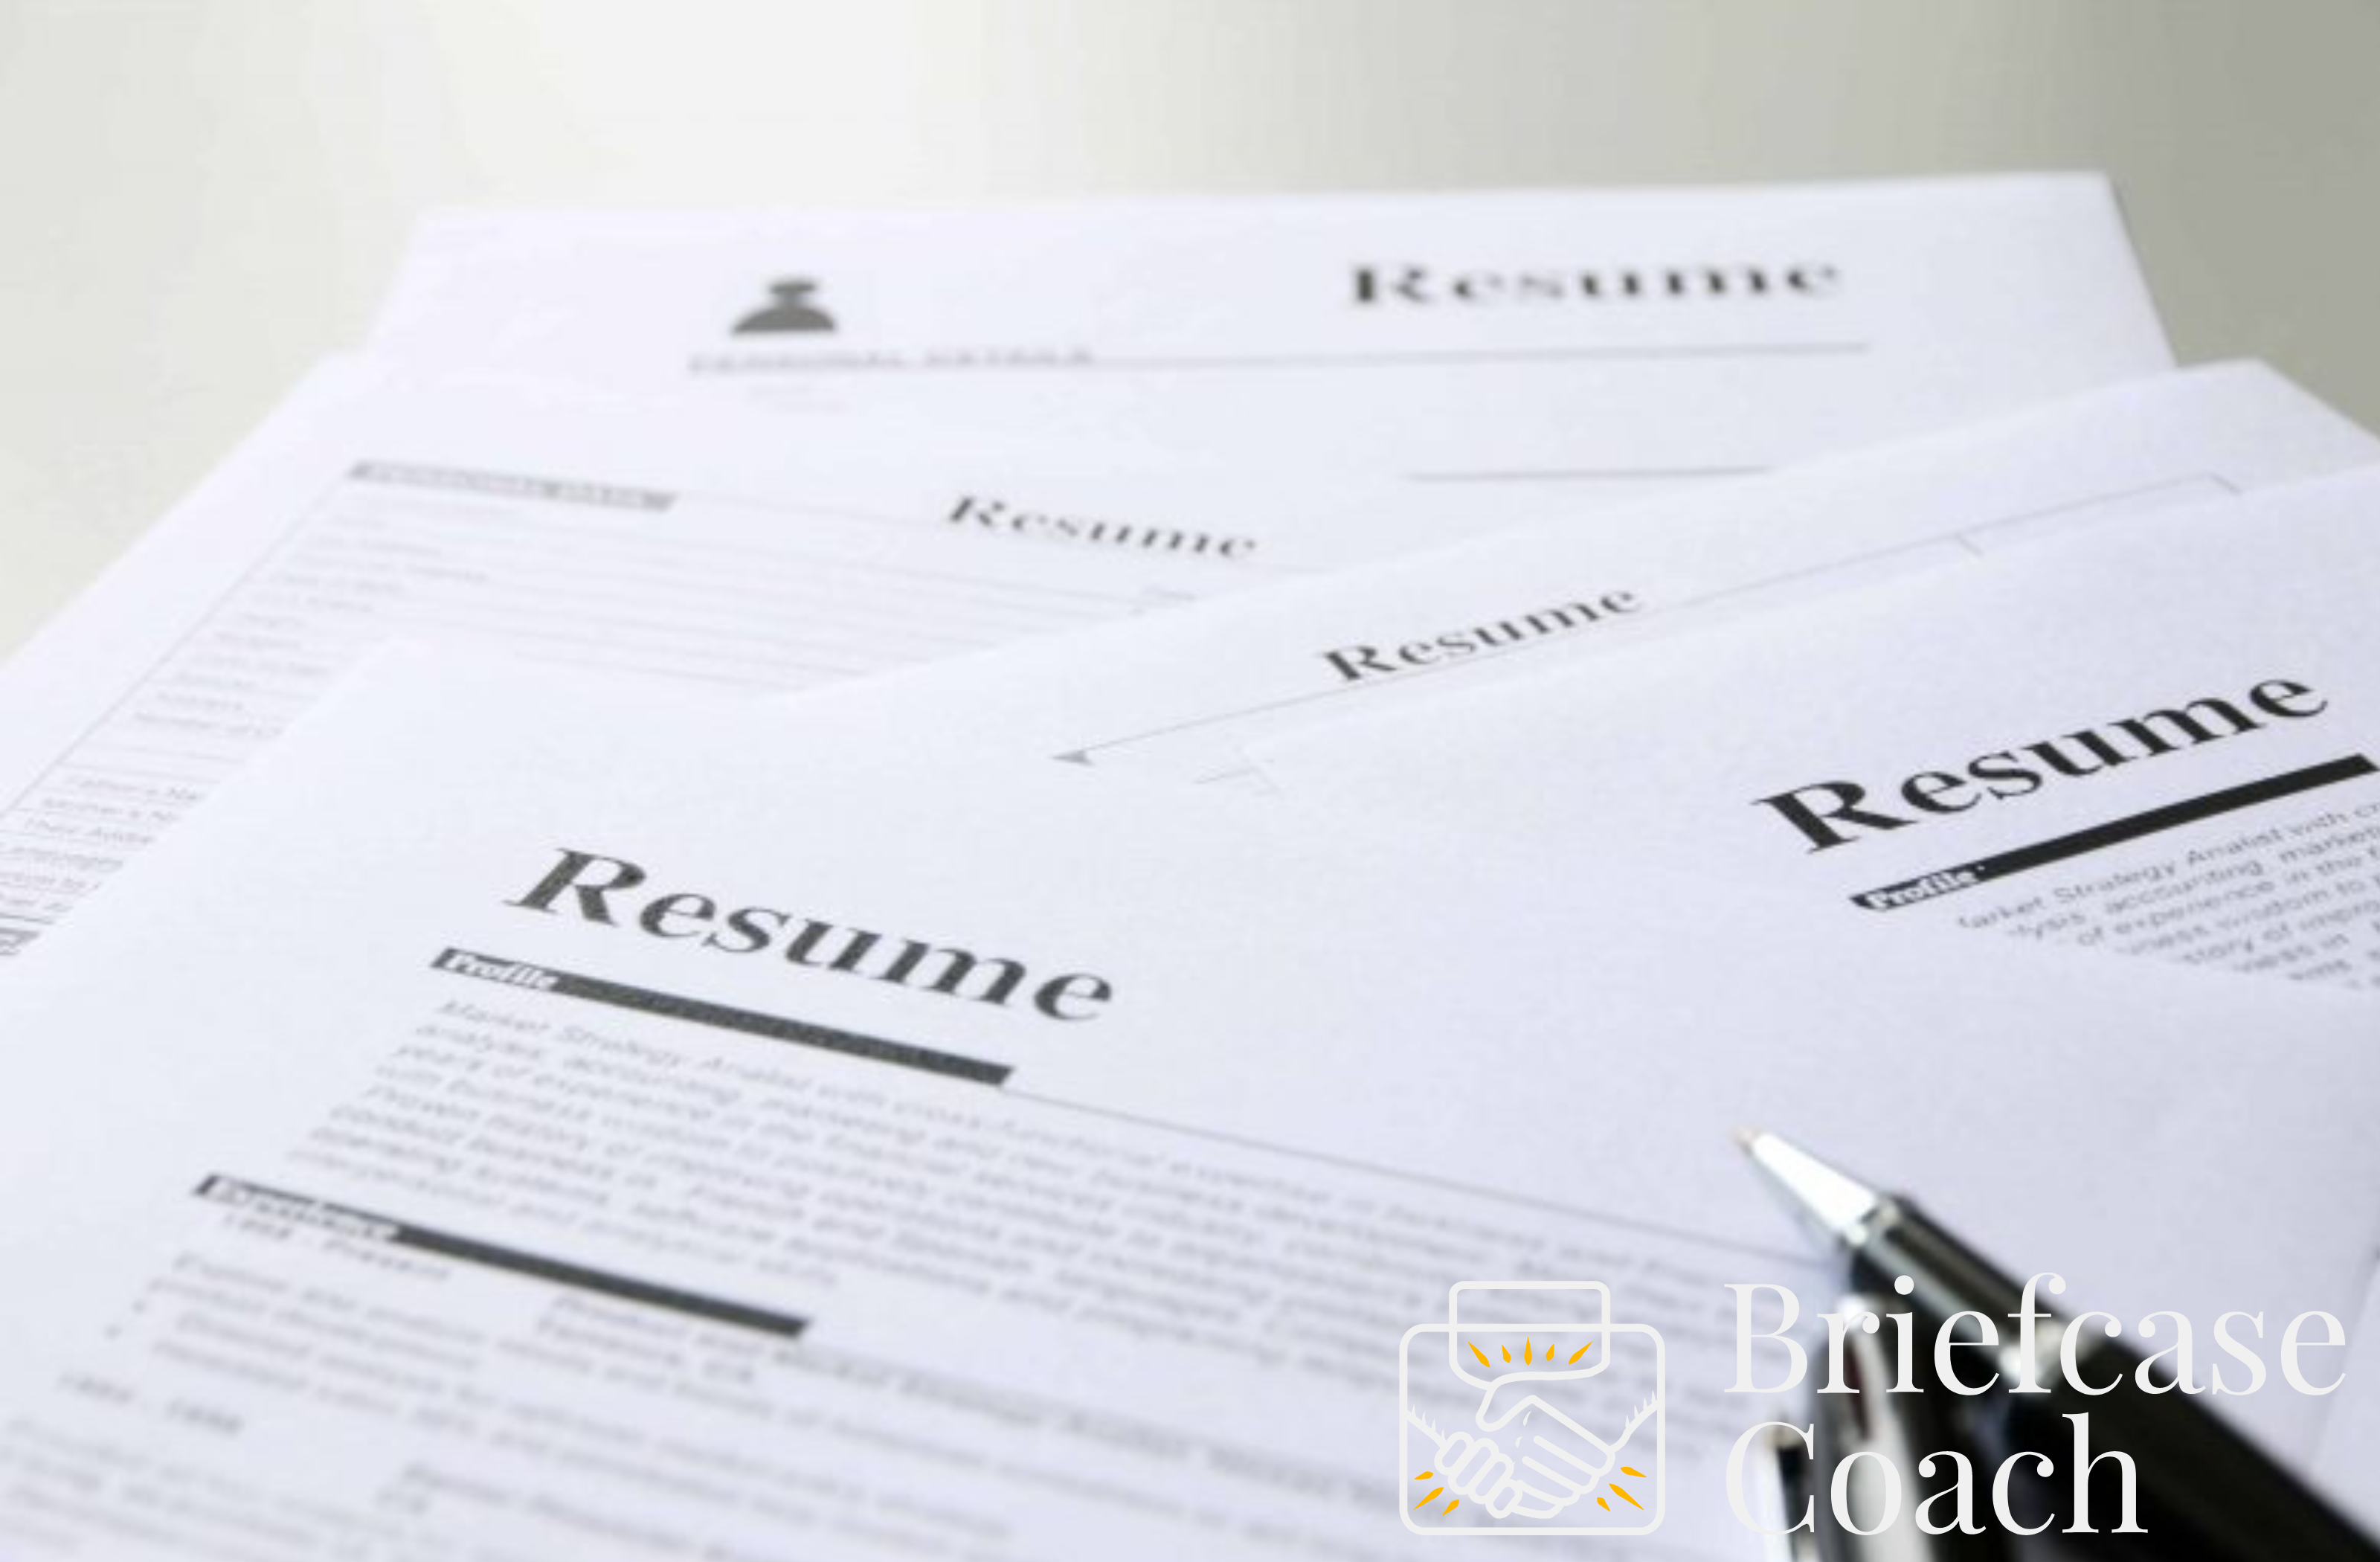 How long can my executive resume be?